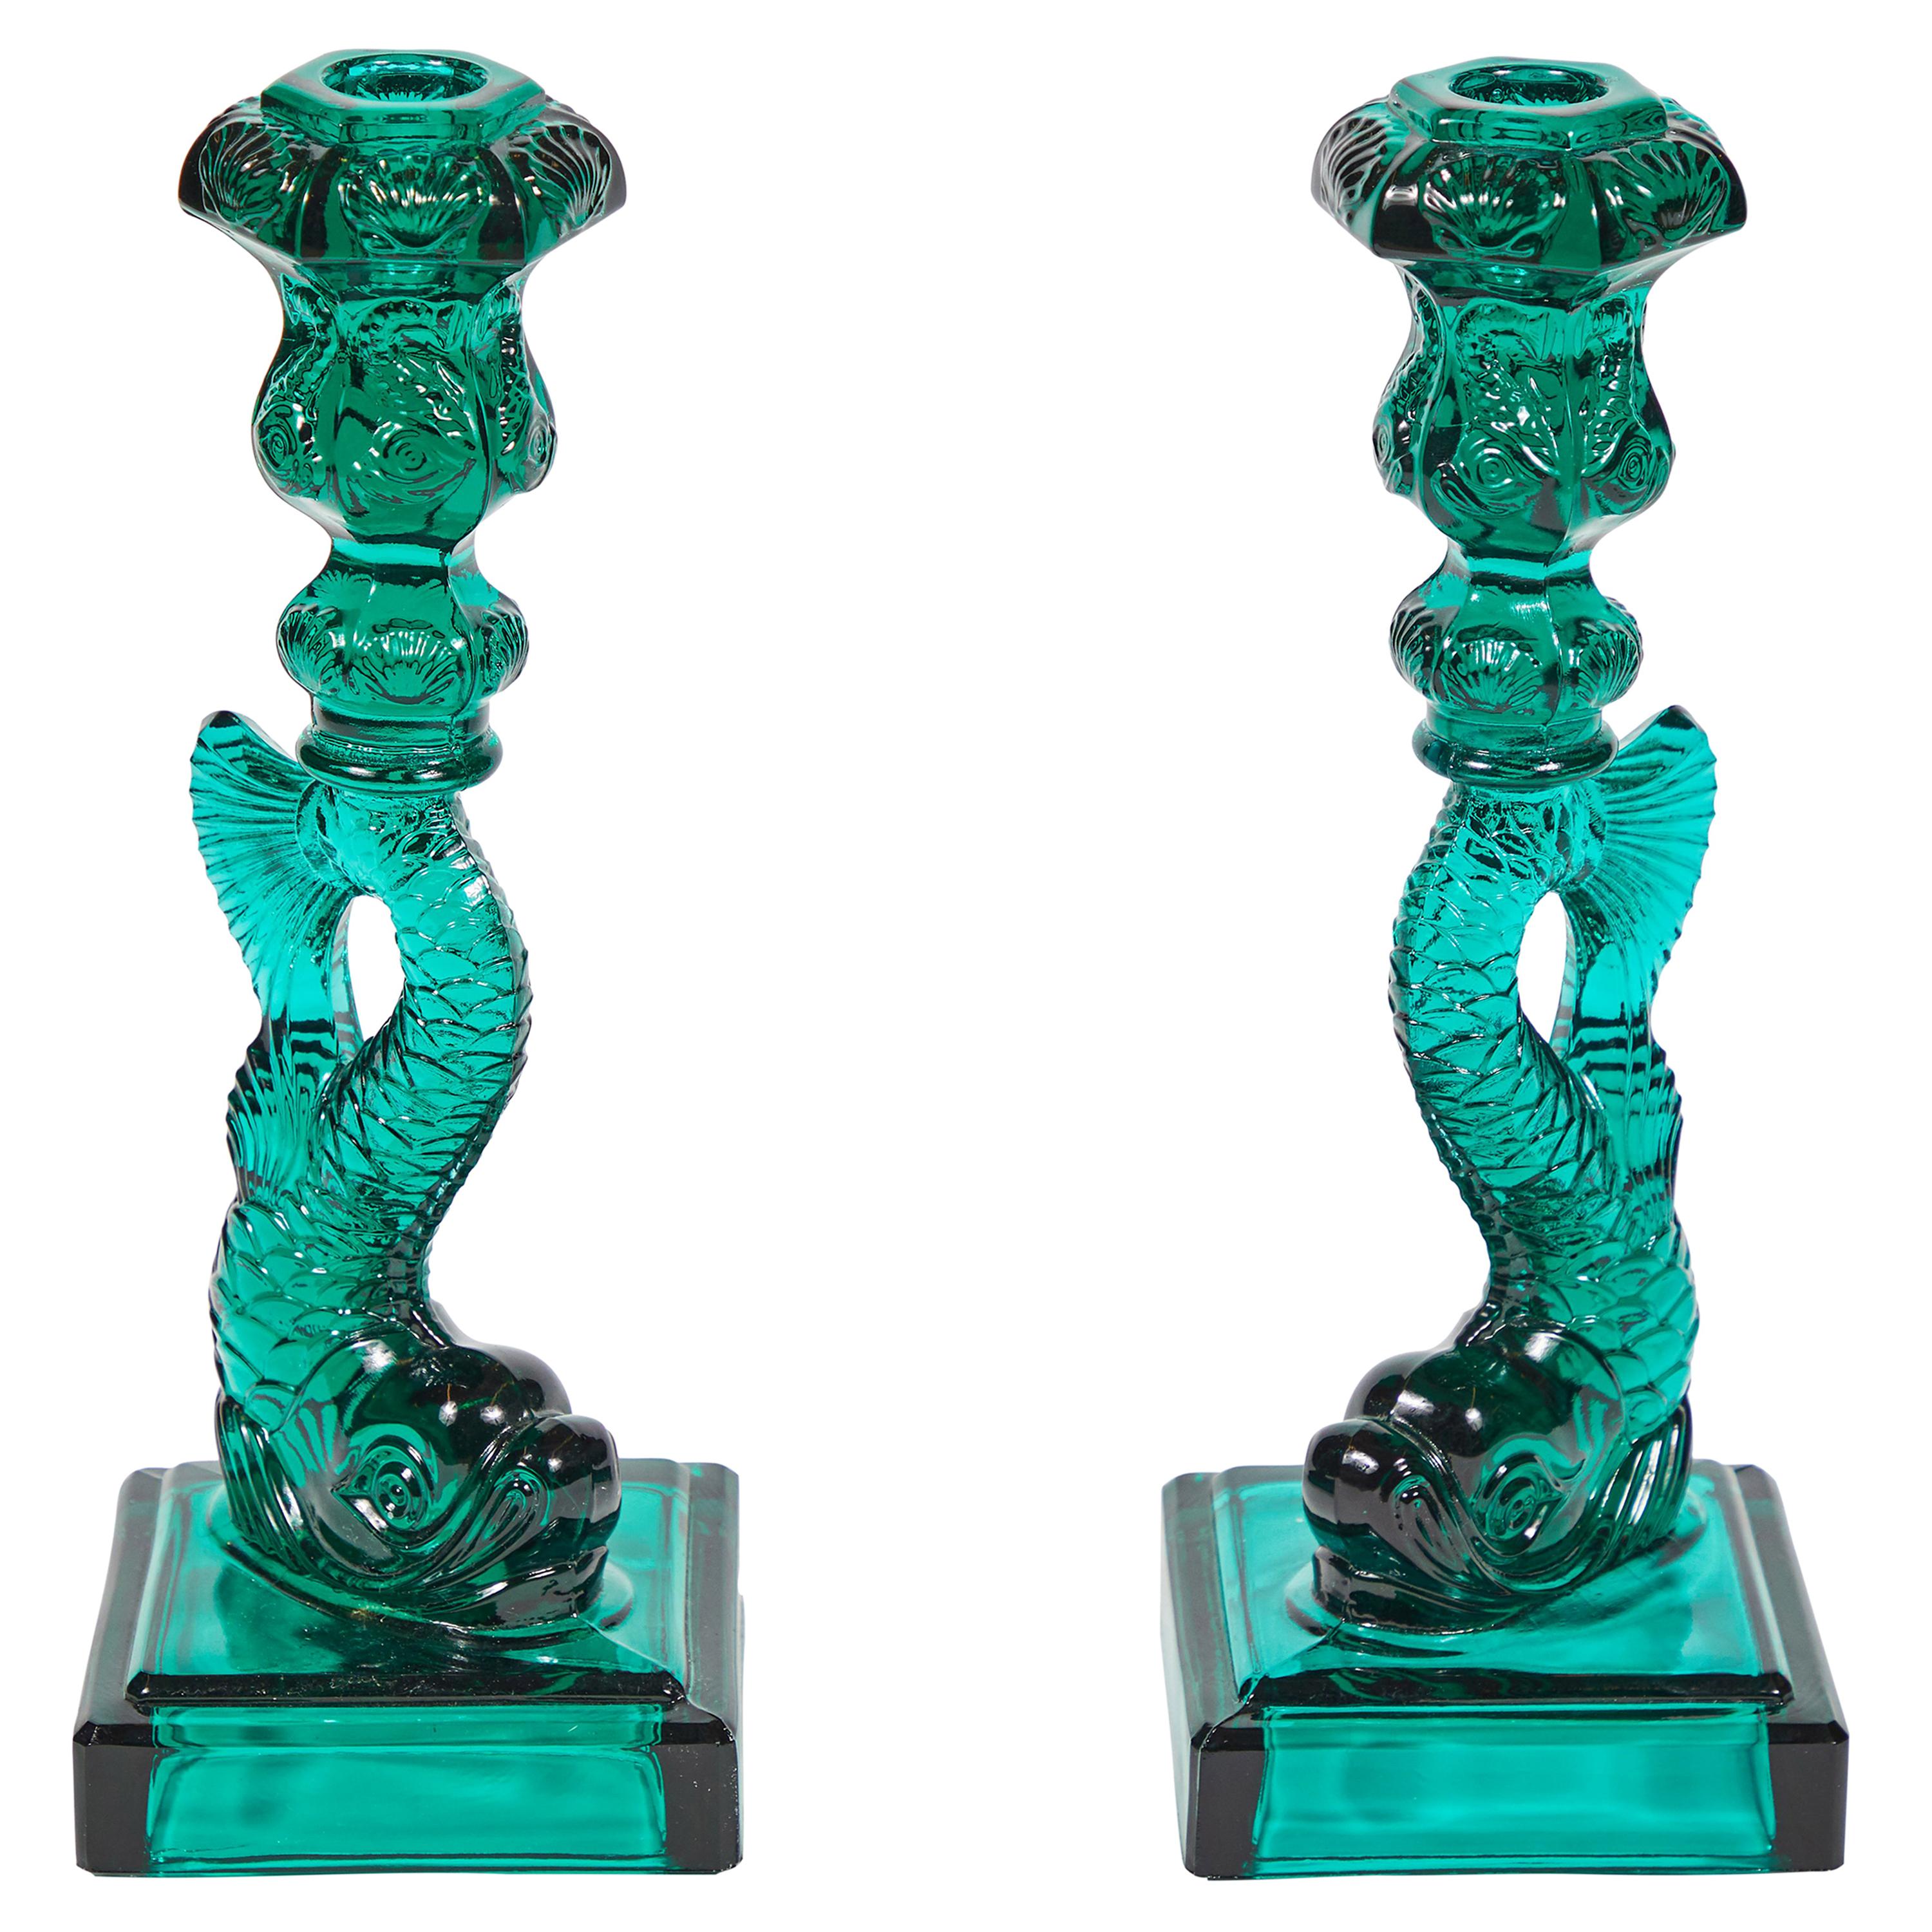 Pair of Vintage MMA Koi Fish Candlesticks in Teal Green Glass